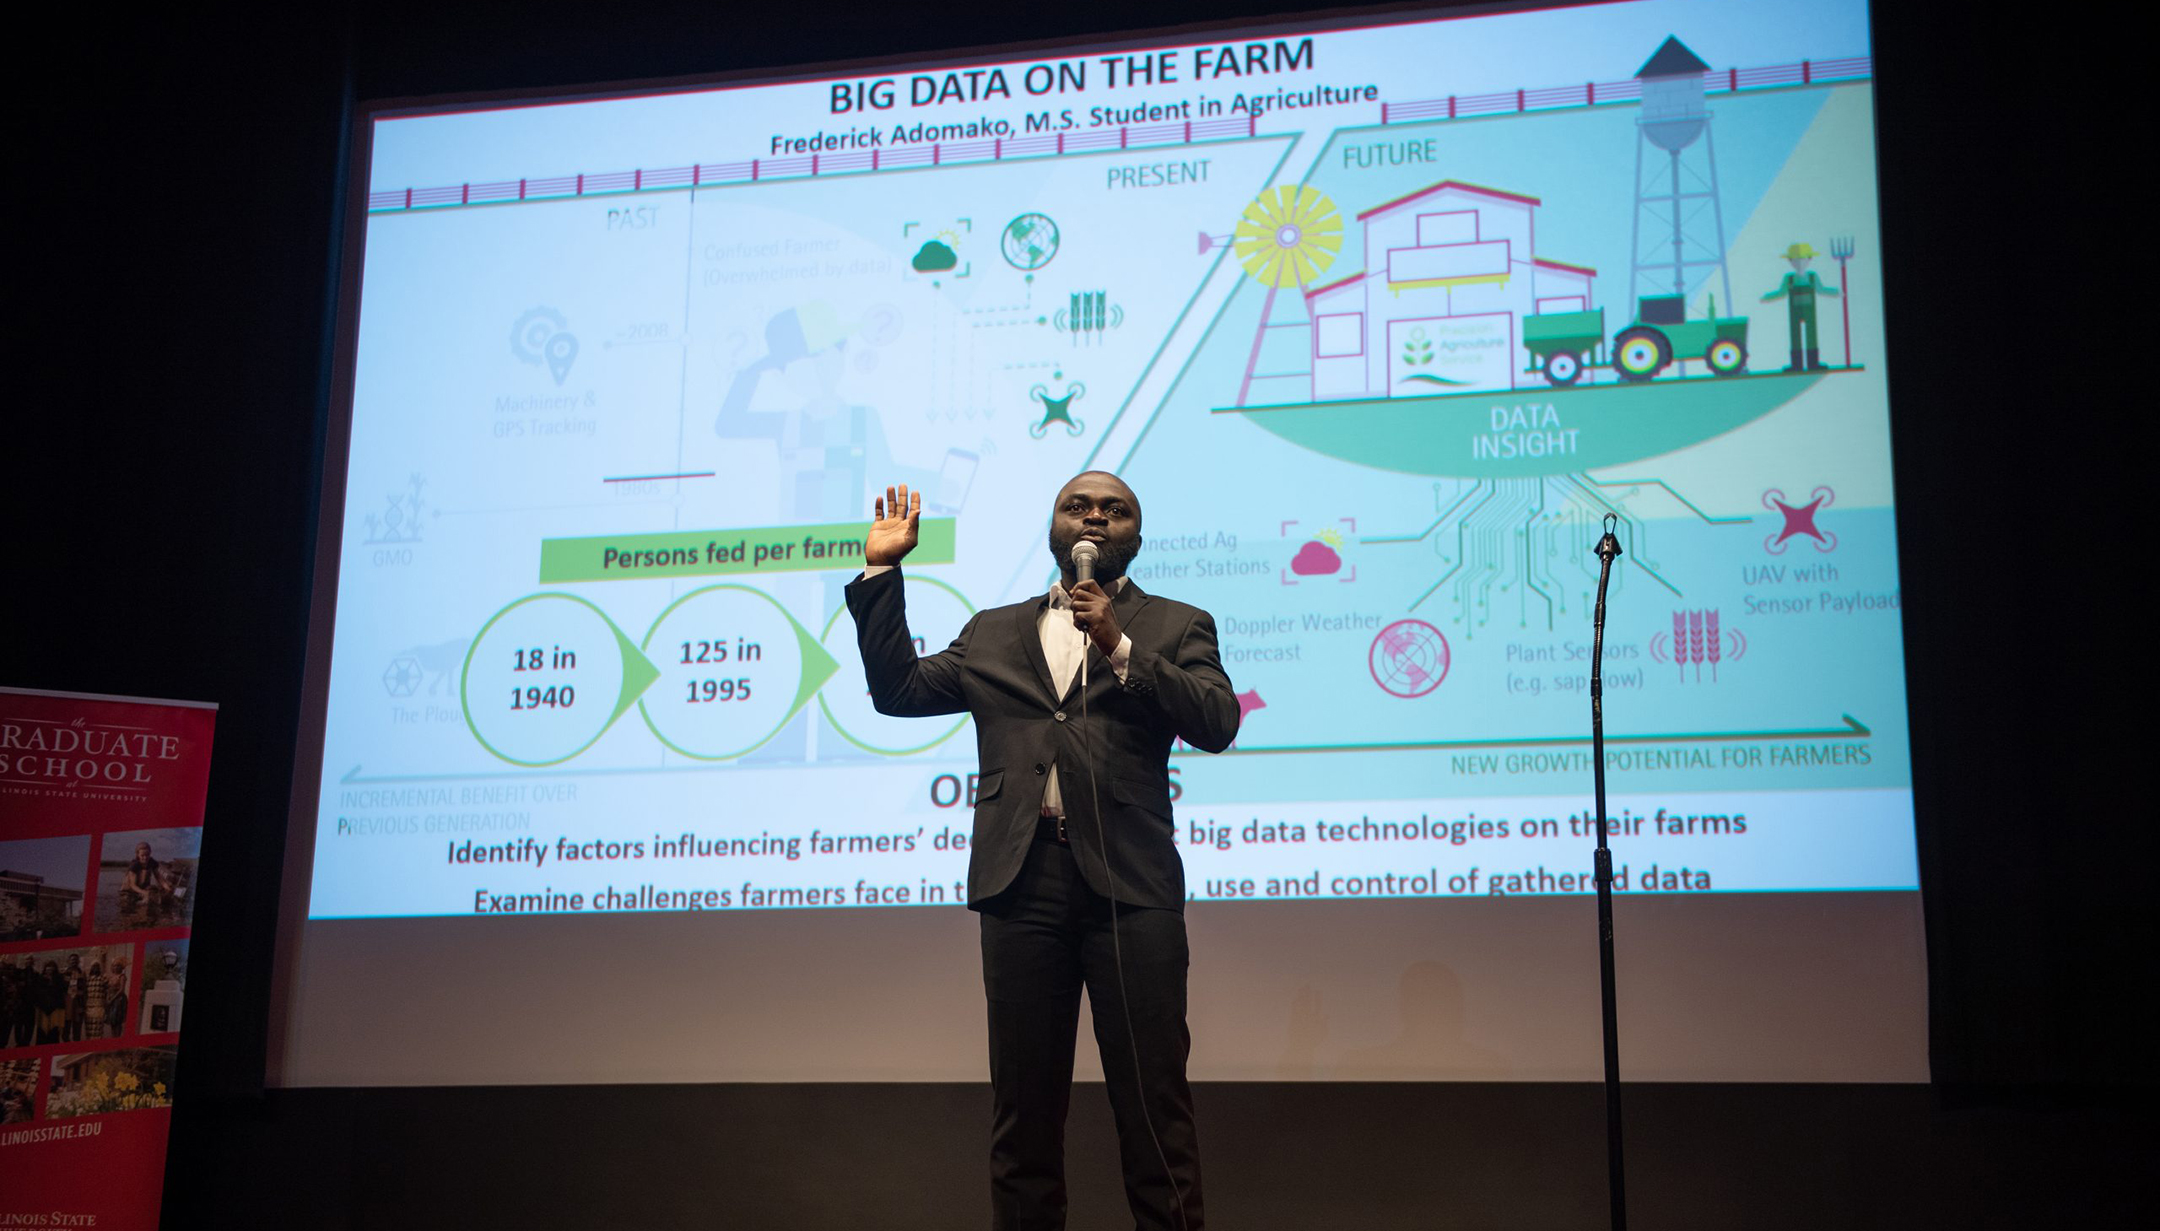 Man standing on stage in front of a screen displaying a slide titled Big Data on the Farm